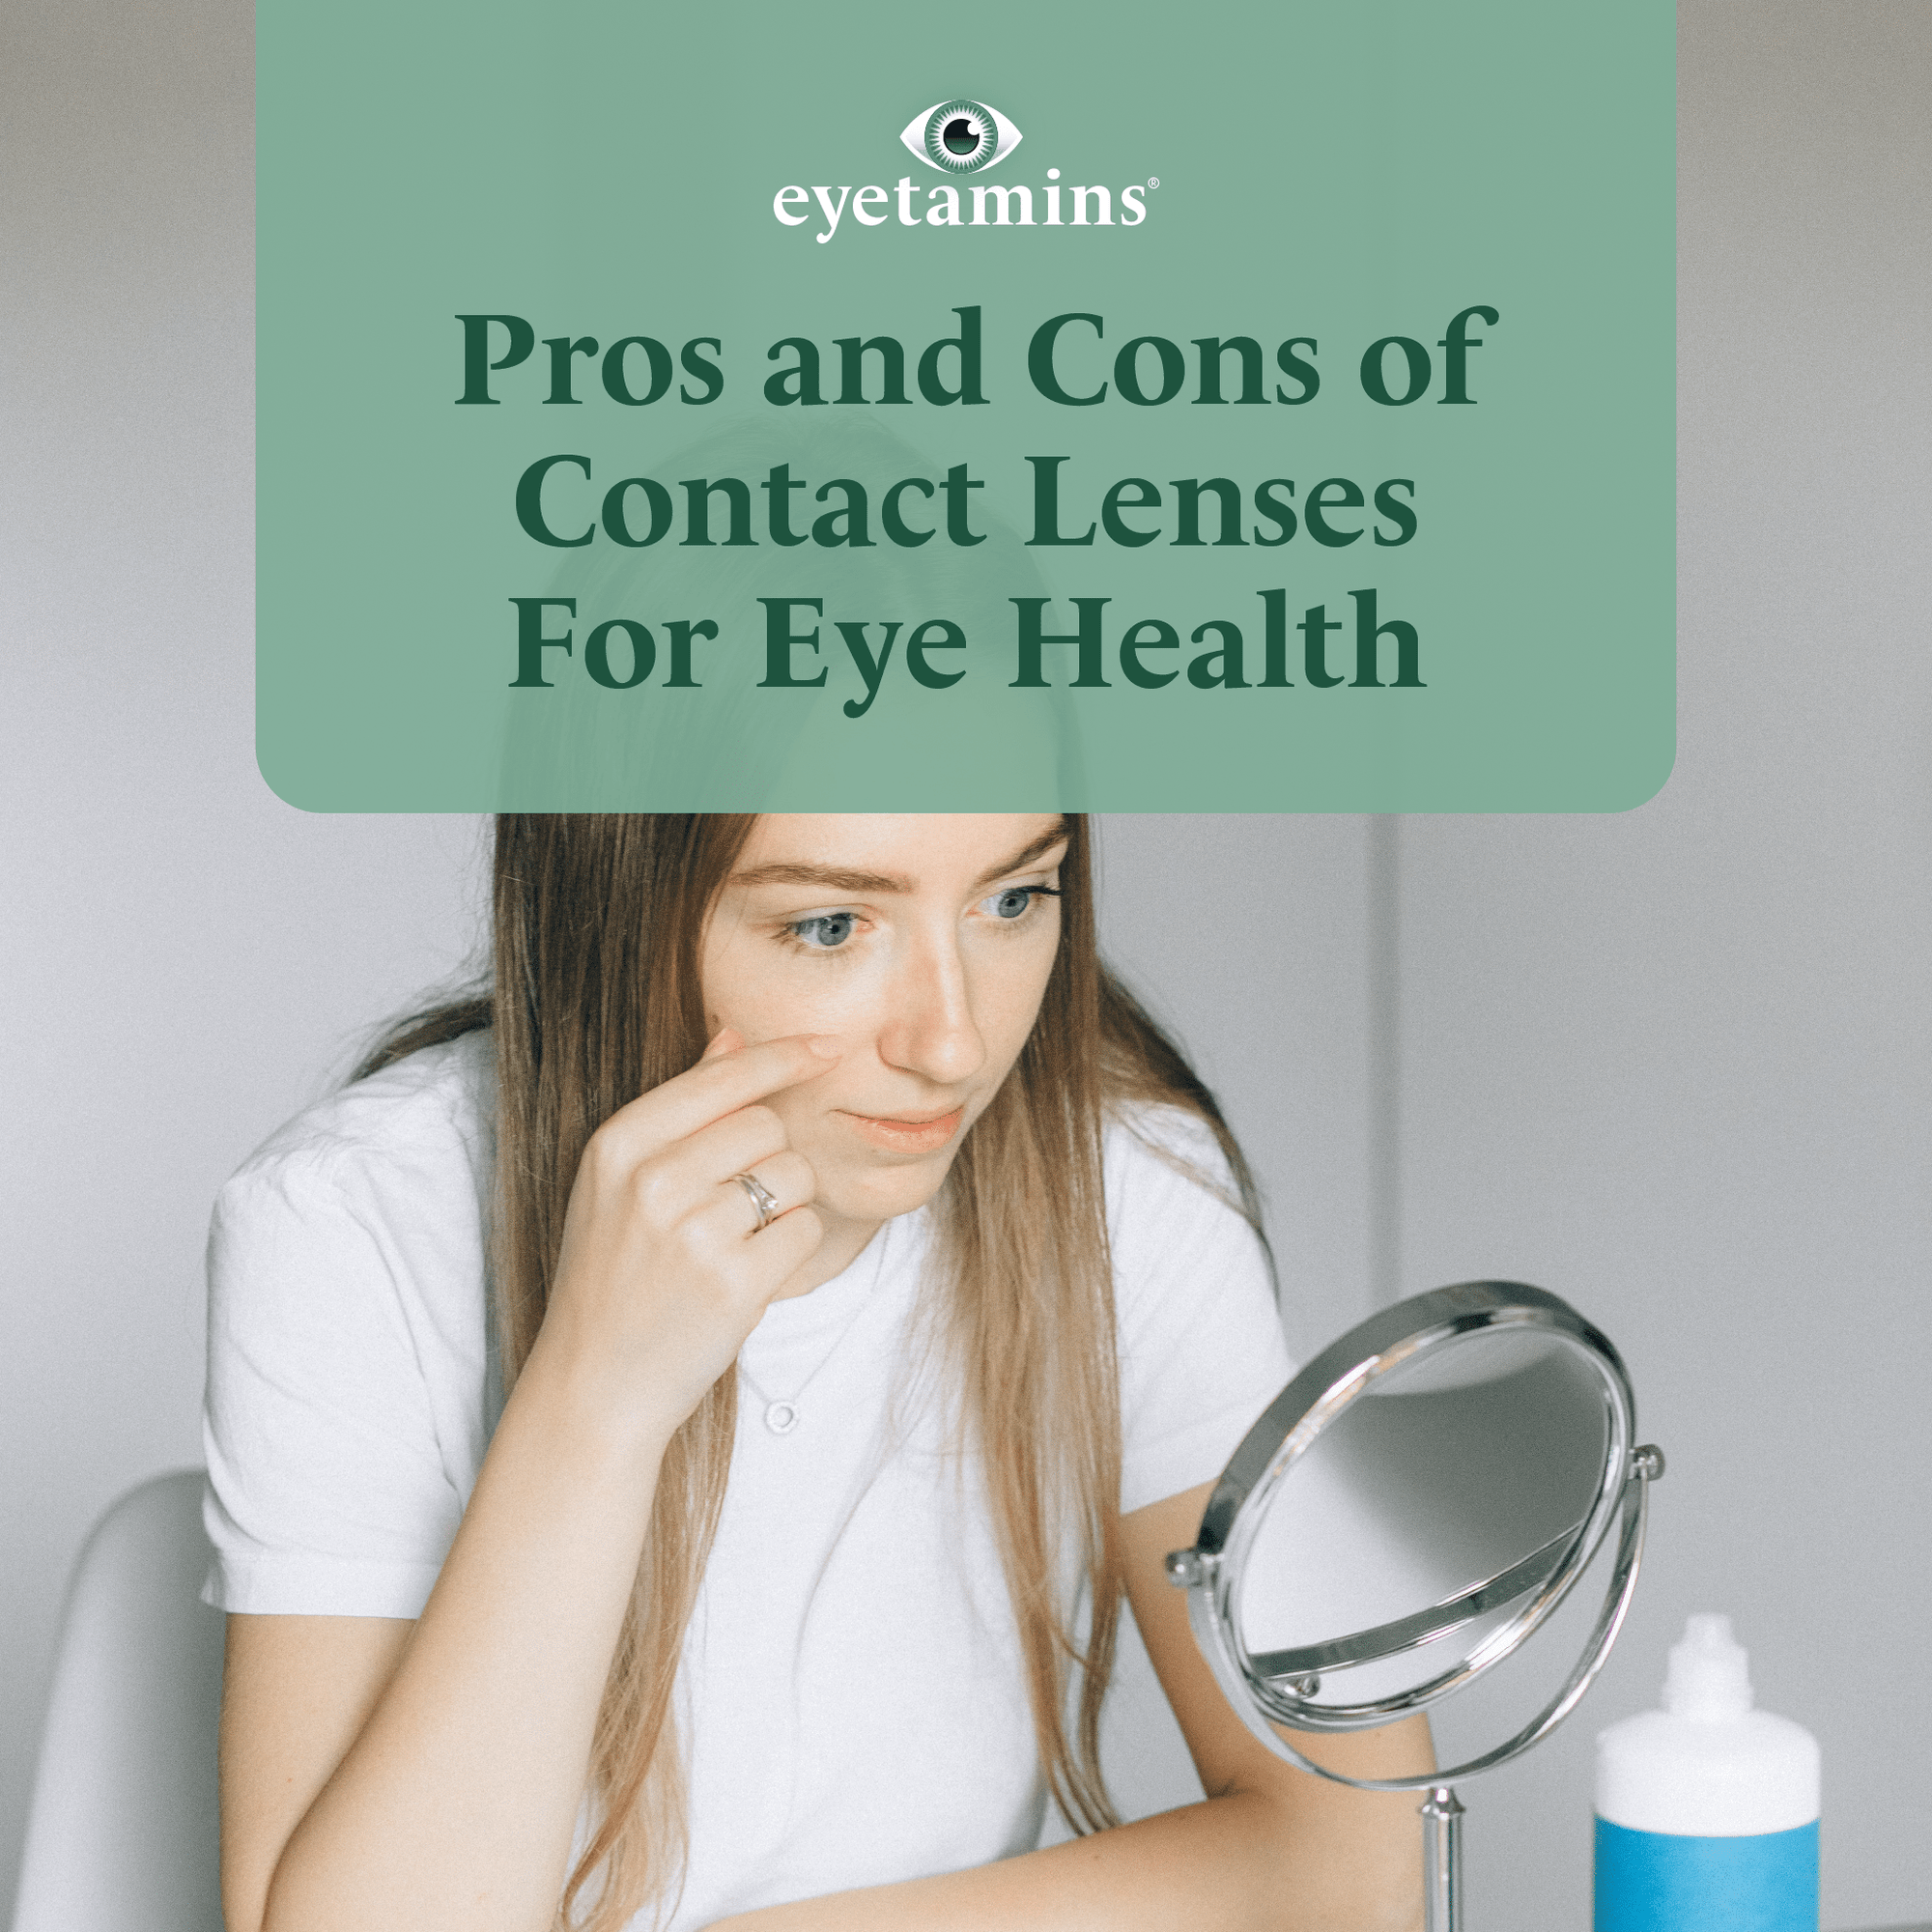 Eyetamins - Pros and Cons of Contact Lenses For Eye Health